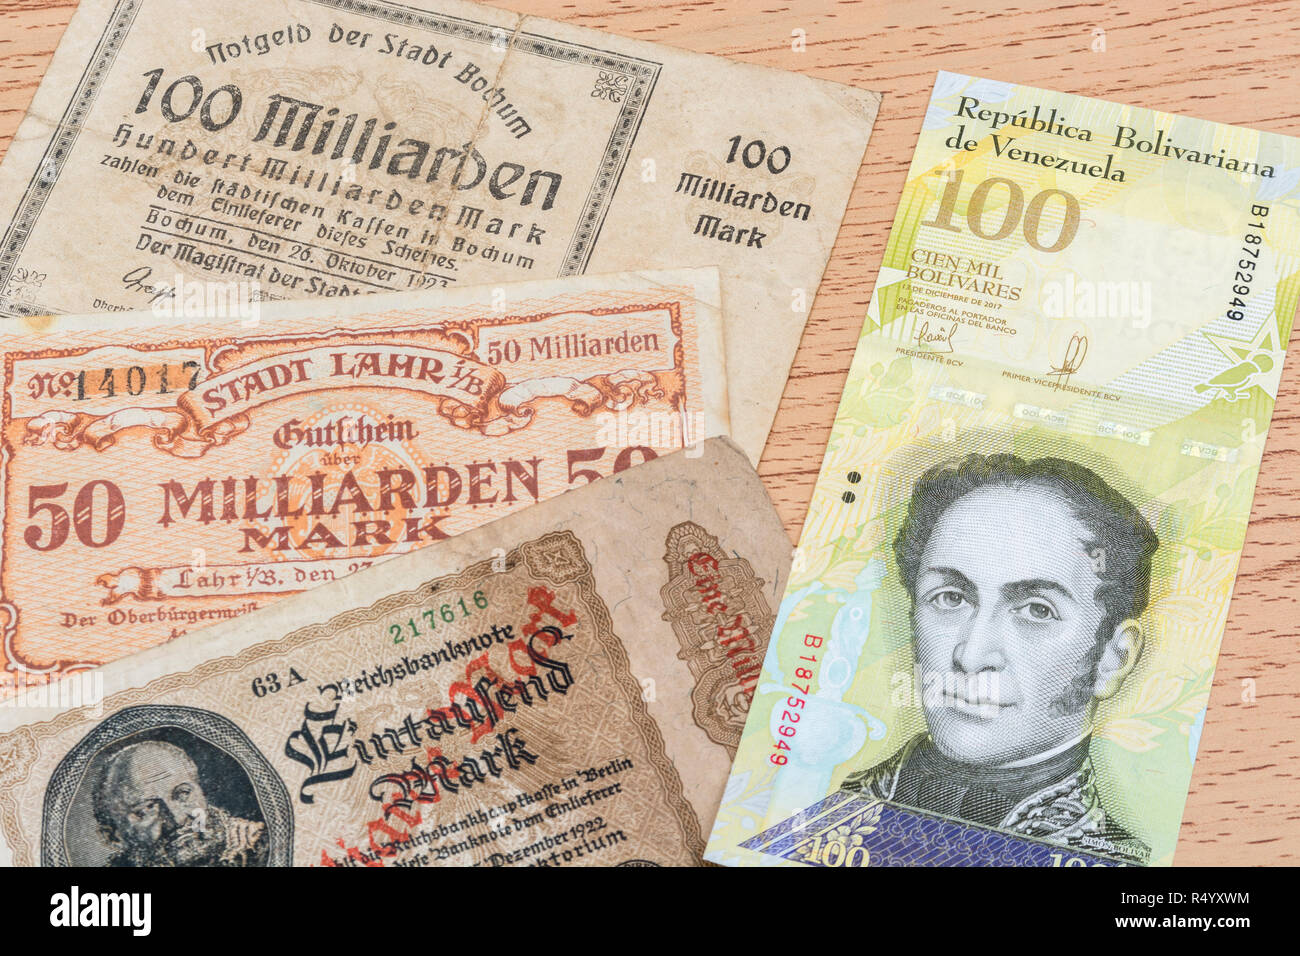 Hyperinflation - 2 classic cases: Germany 1920s (1 Billion to 100 Billion Mark notes), with Venezuelan 100,000 Bolivar banknote. Stock Photo